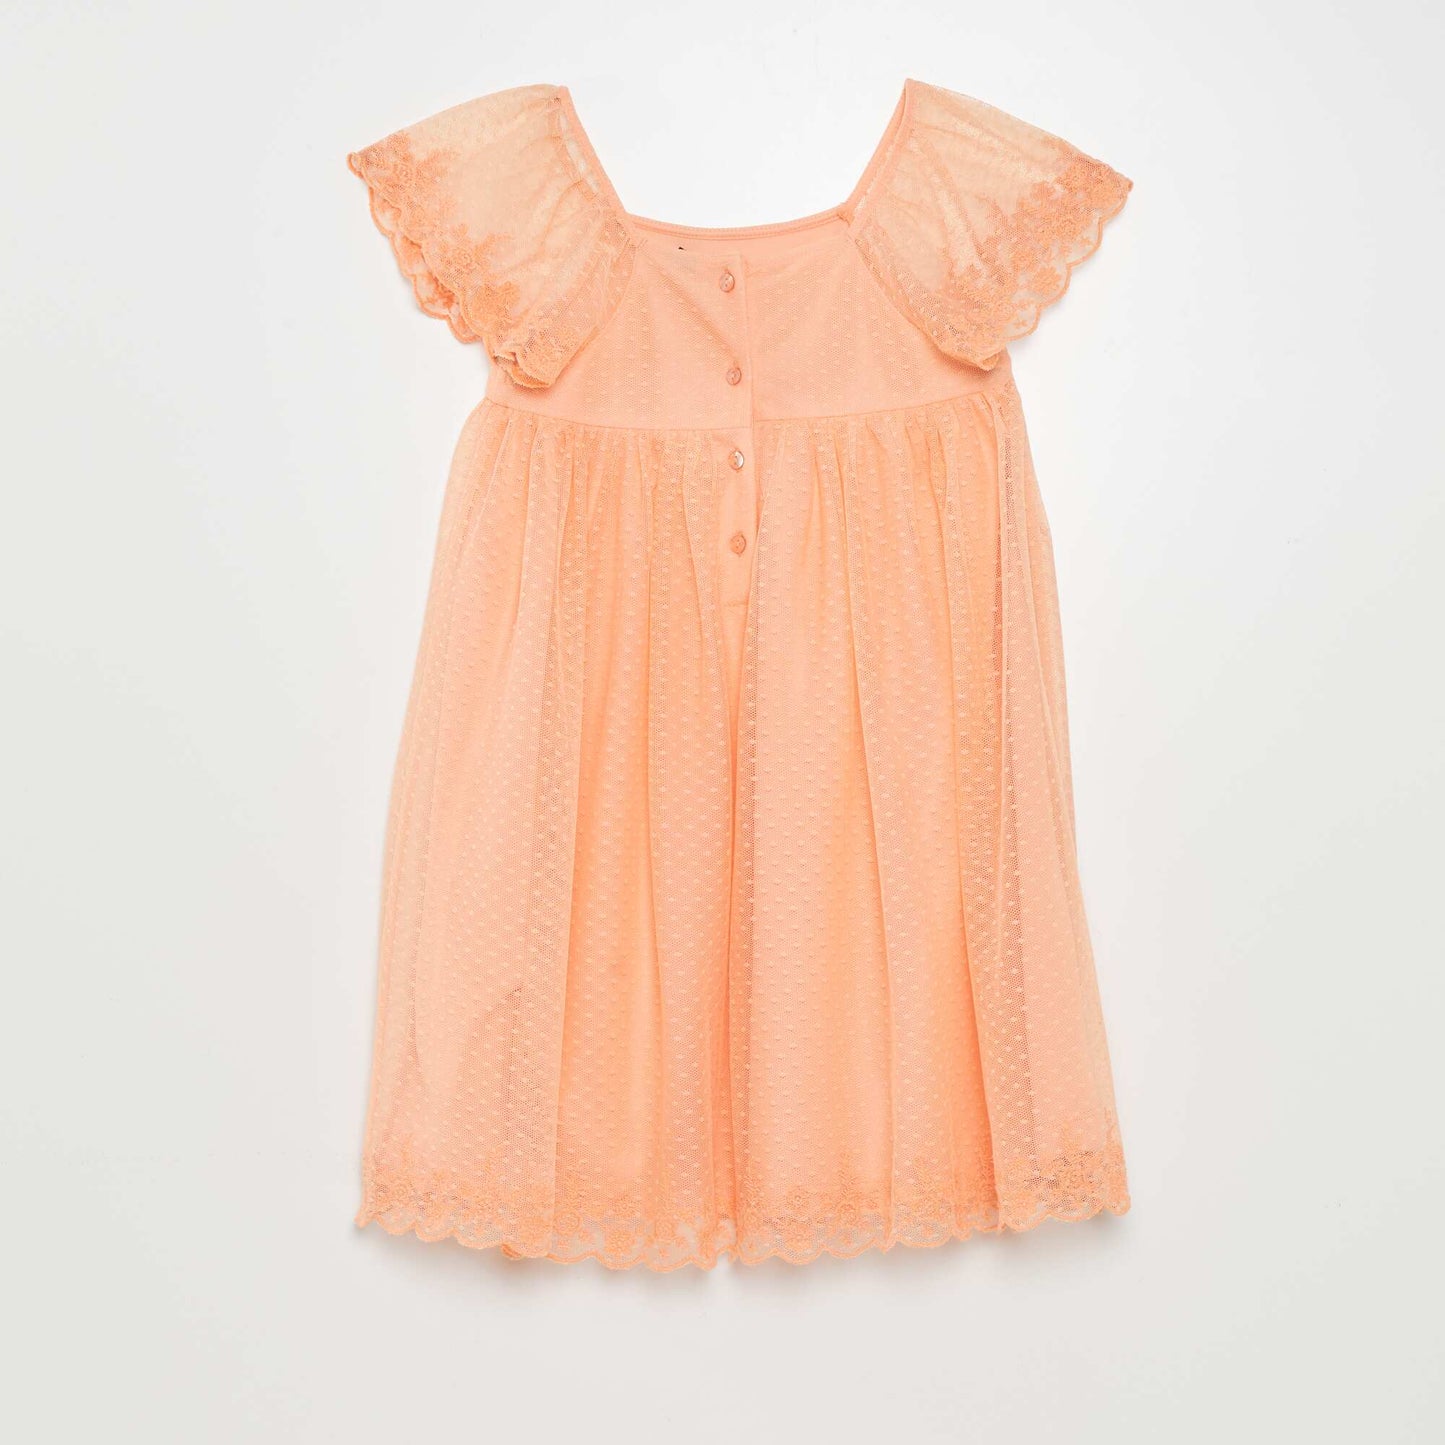 Dotted Swiss tulle A-line dress ORANGE